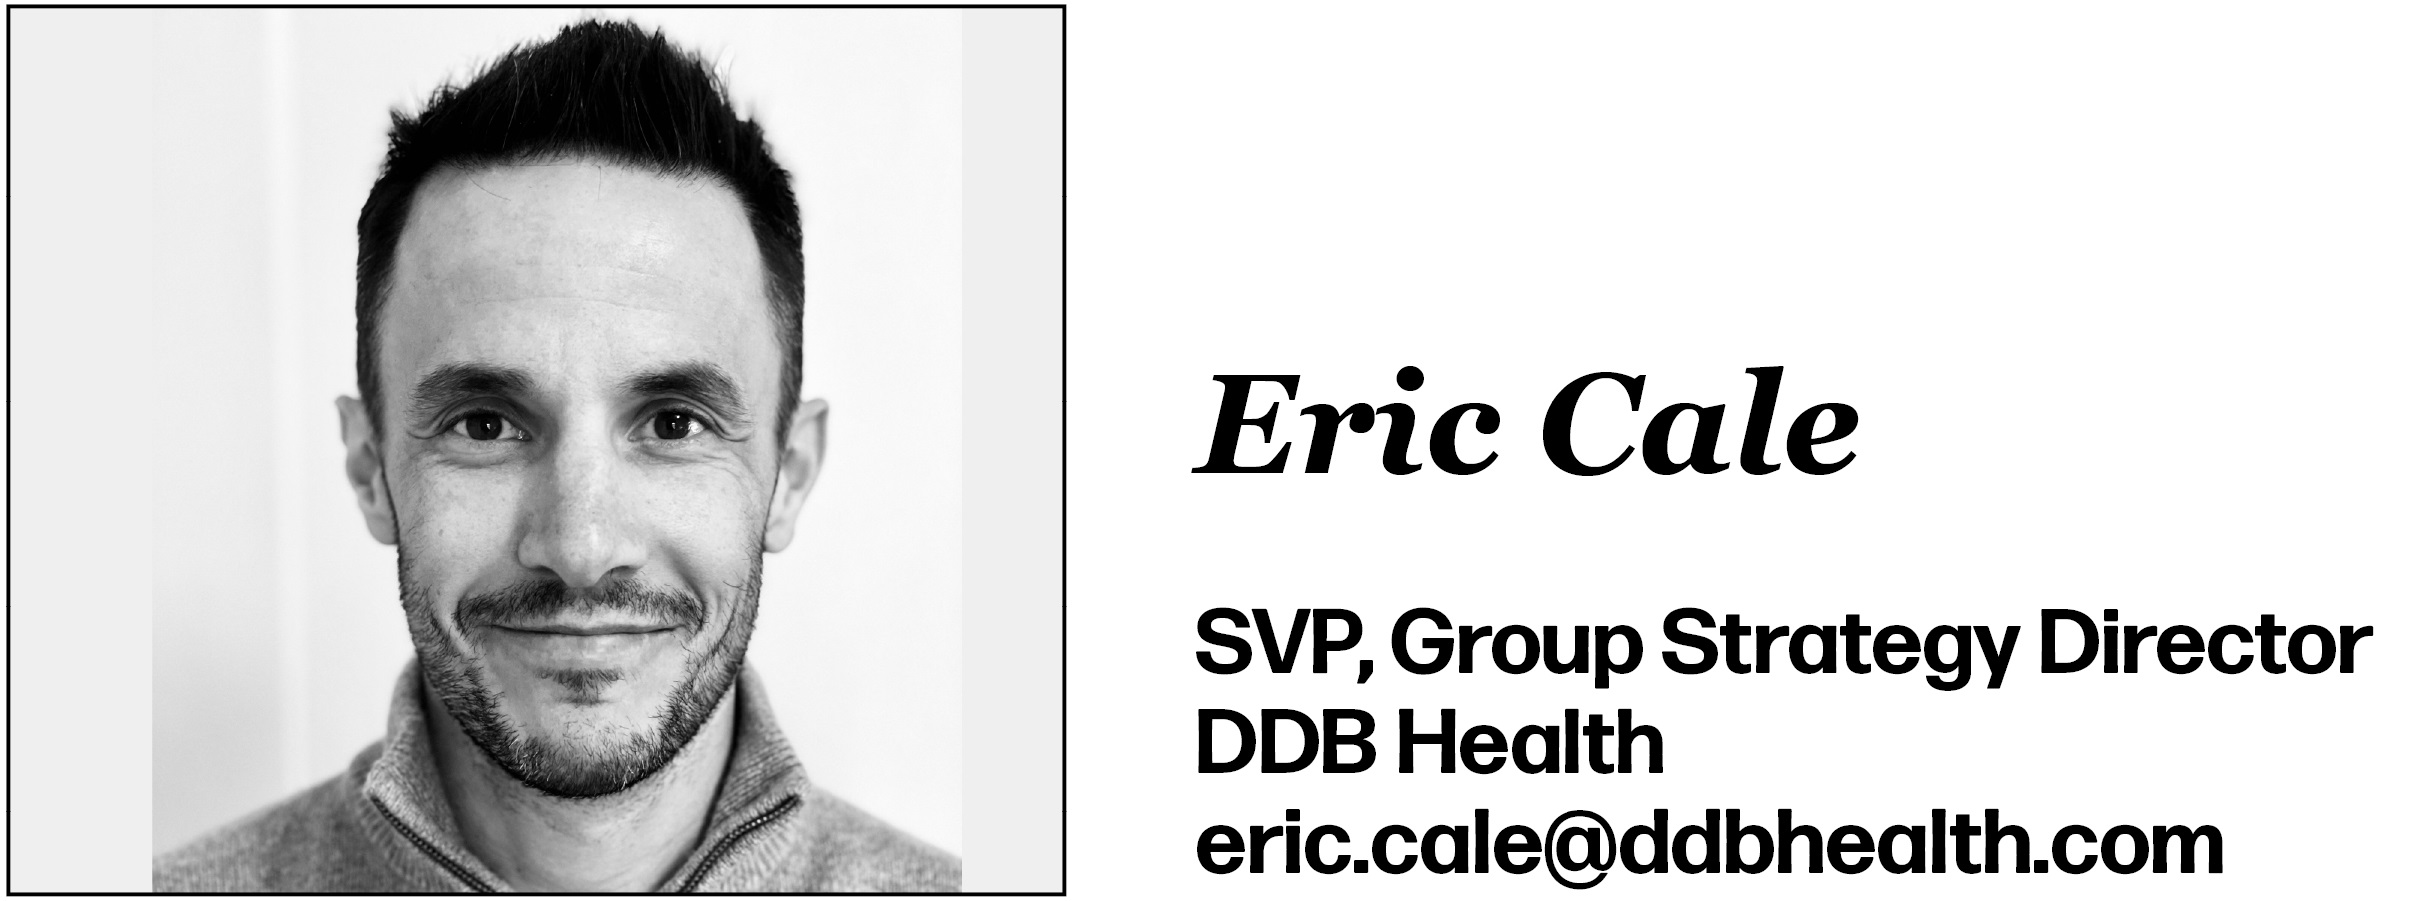 Eric Cale is SVP, Group Strategy Director‬‬ at DDB Health‬. His email is eric.cale@ddbhealth.com. 